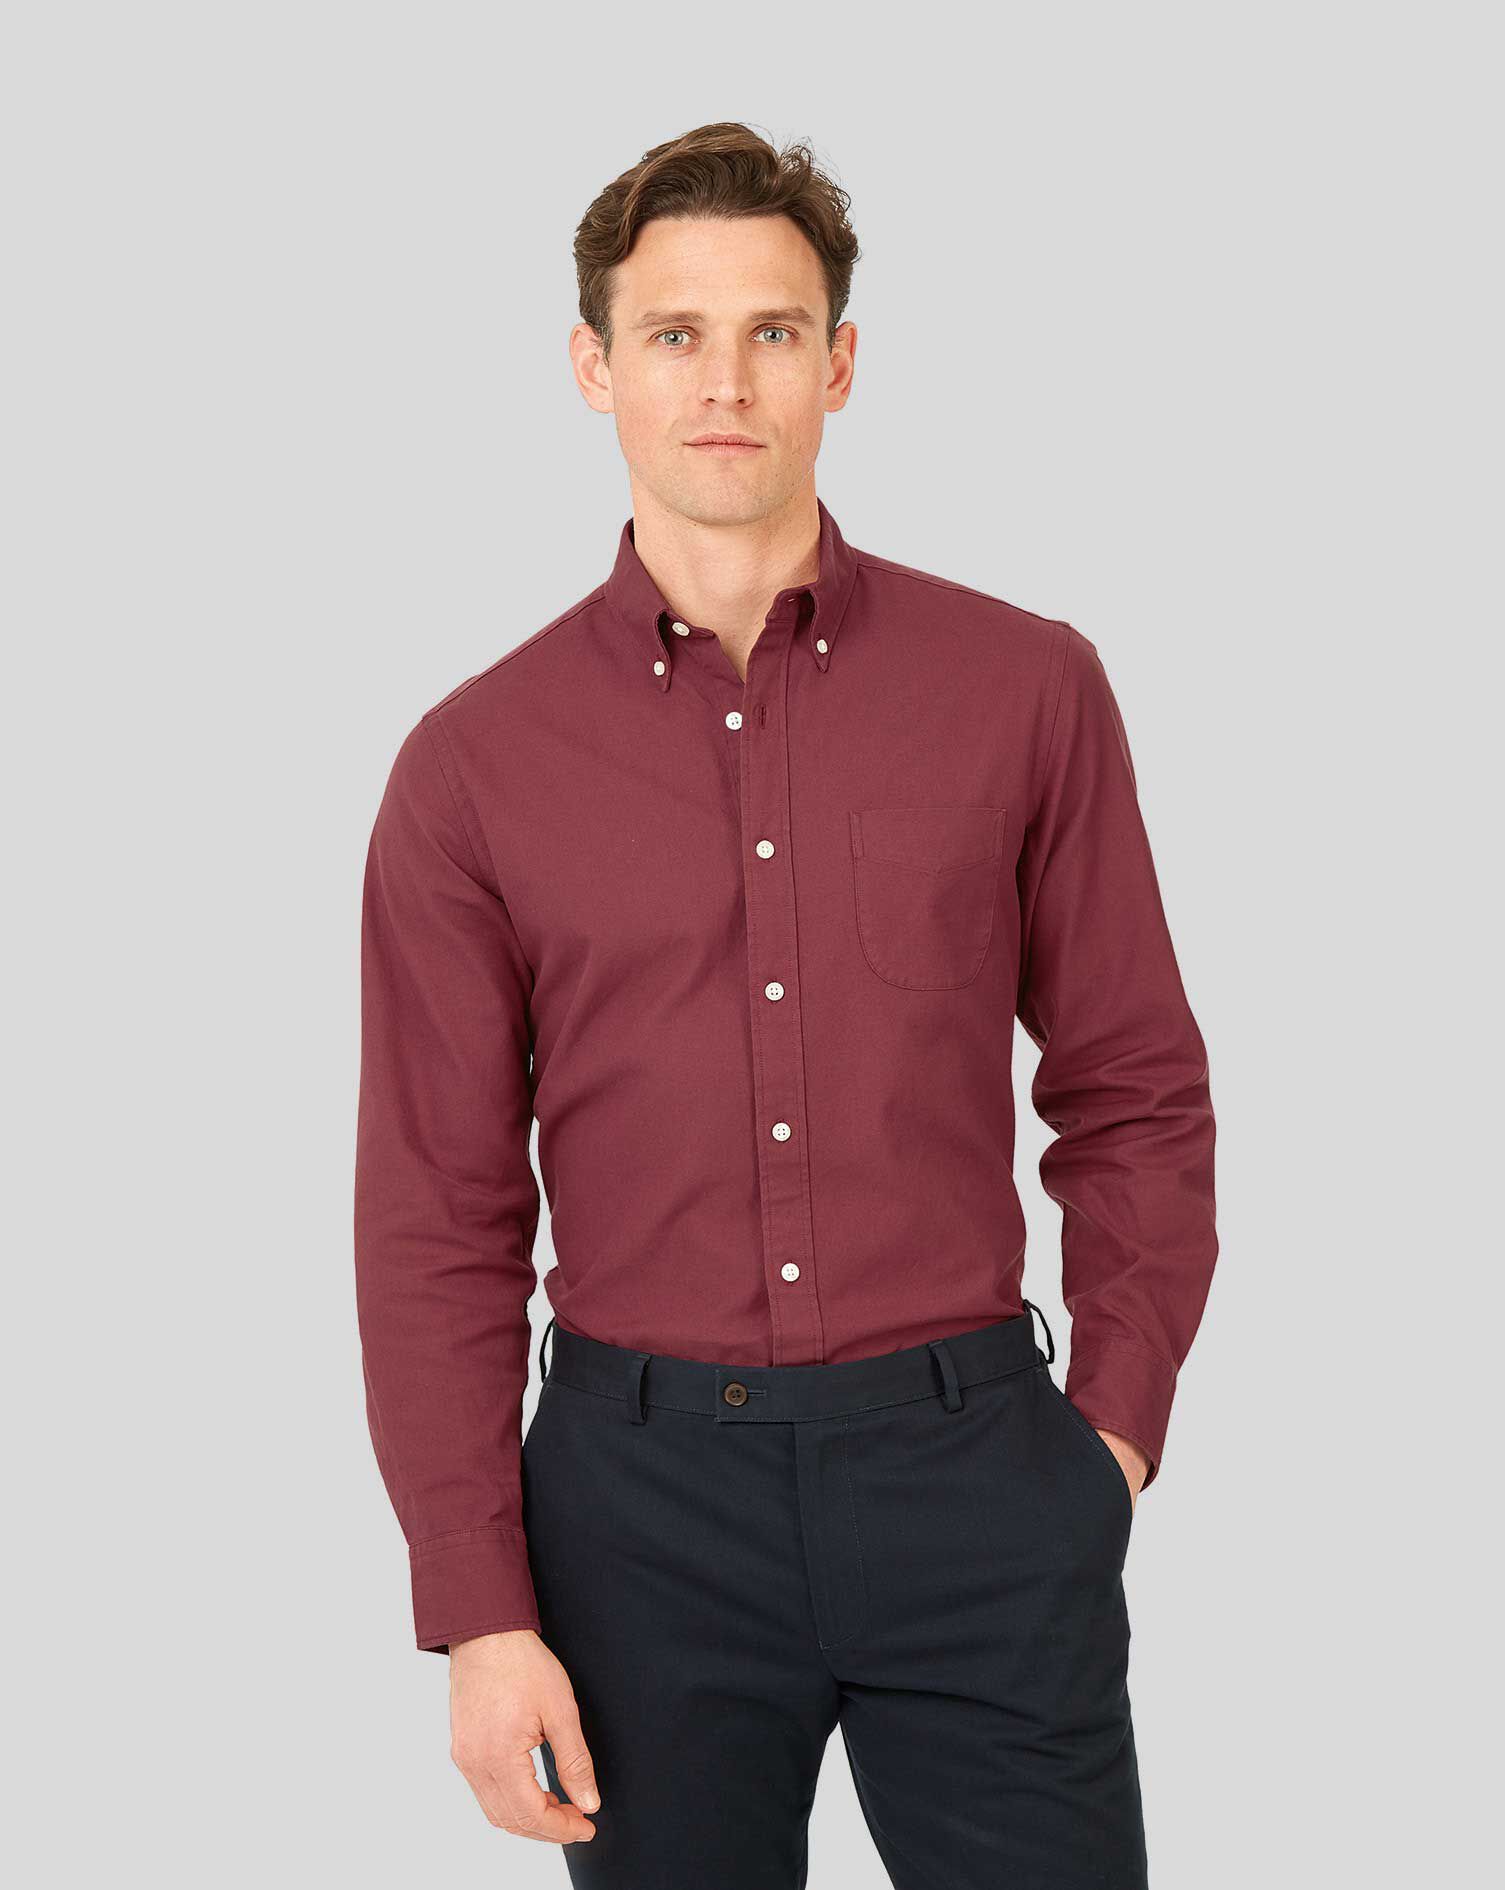 Burgundy Button Up Shirt Top Sellers ...